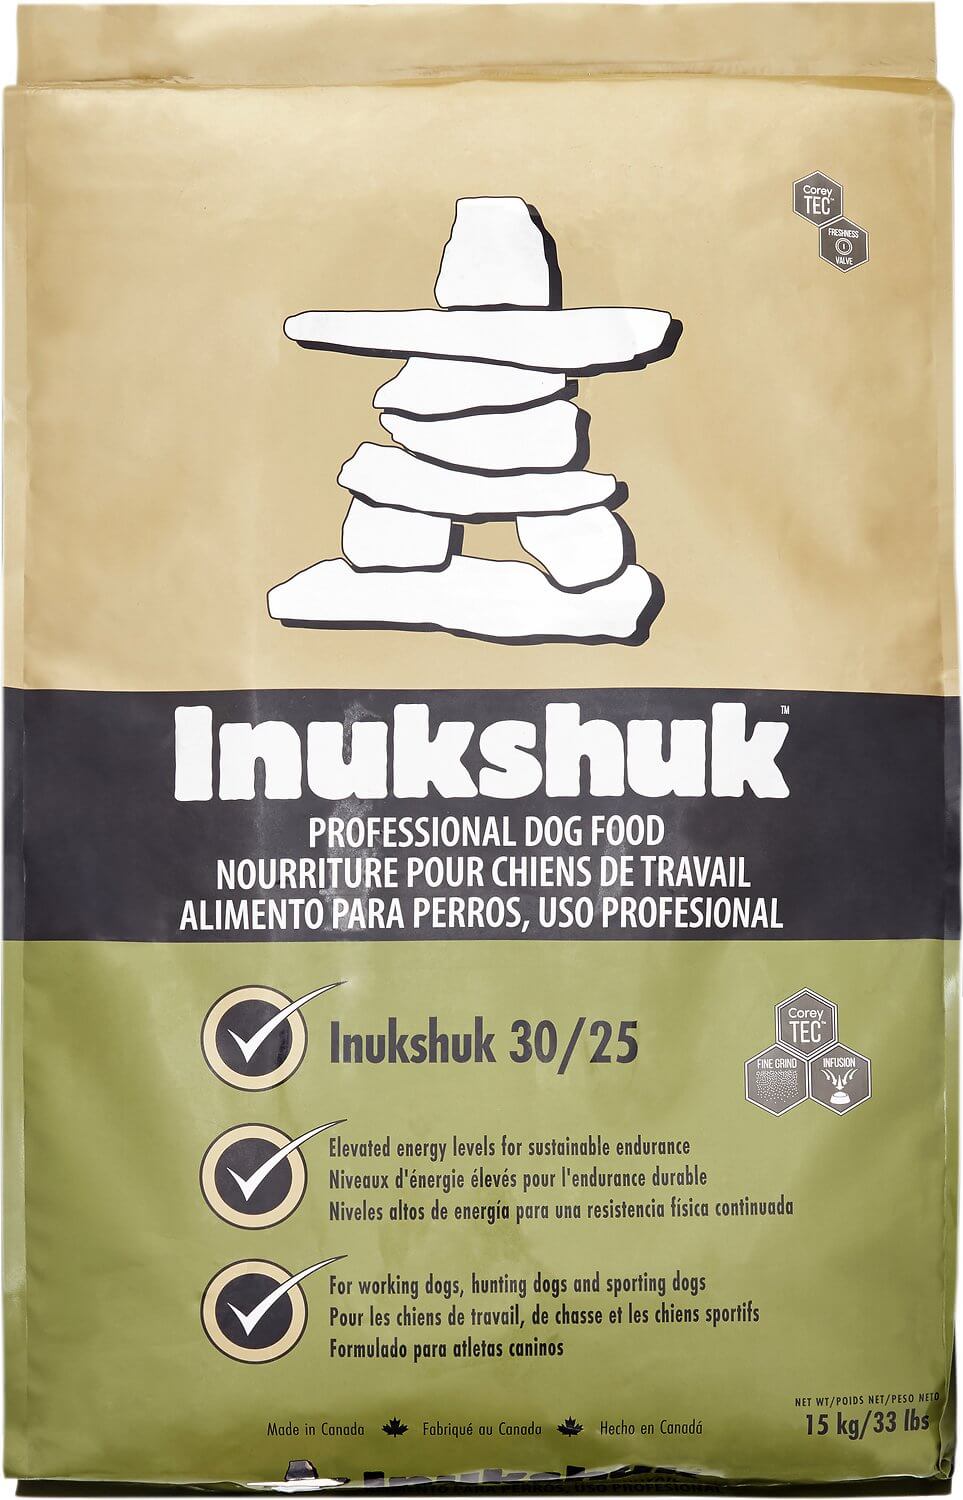 Inukshuk Dog Food Review (Dry)